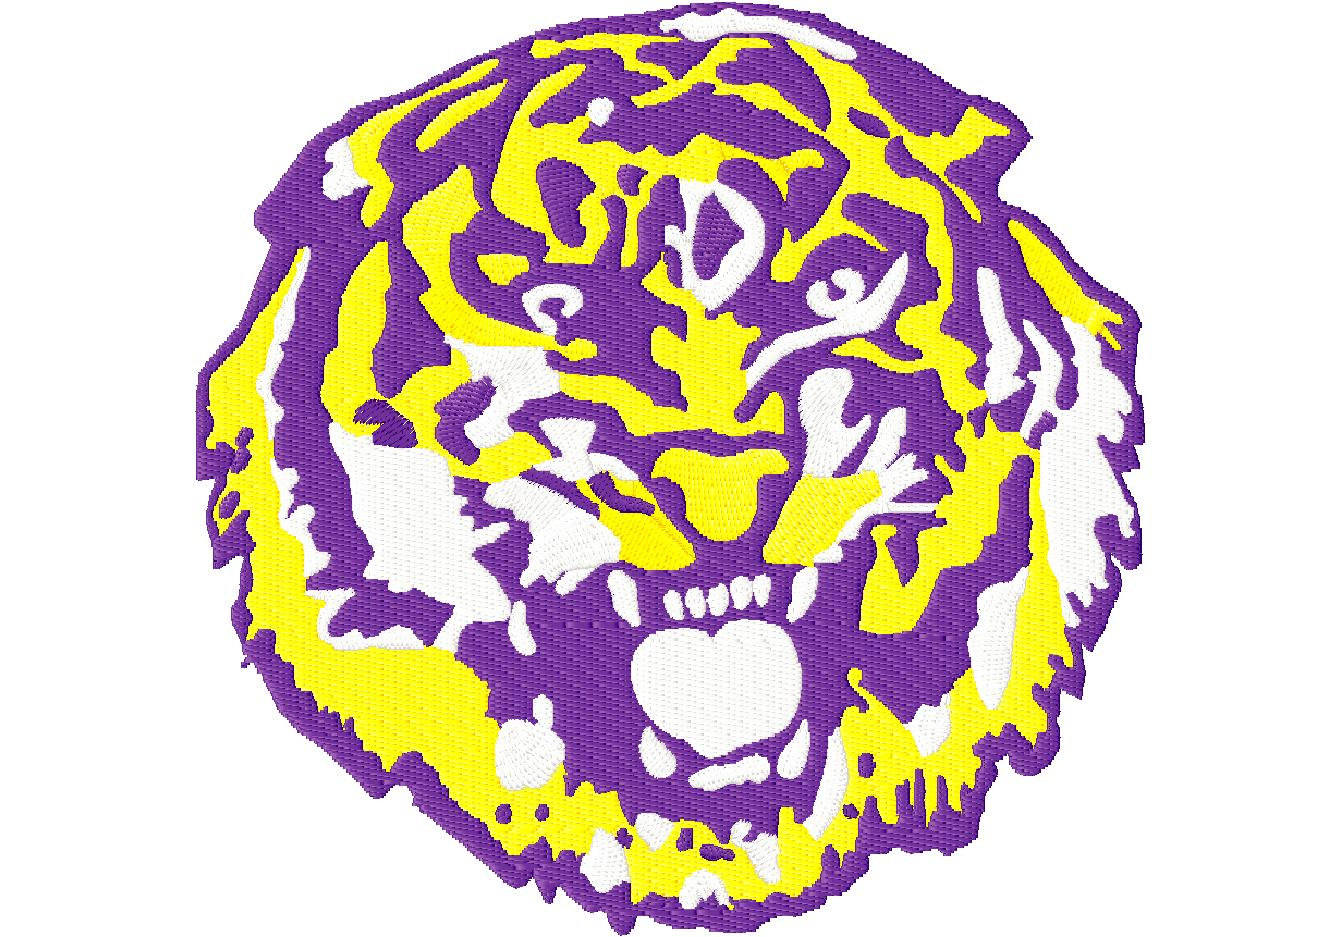 Lsu Tiger - Clipart library